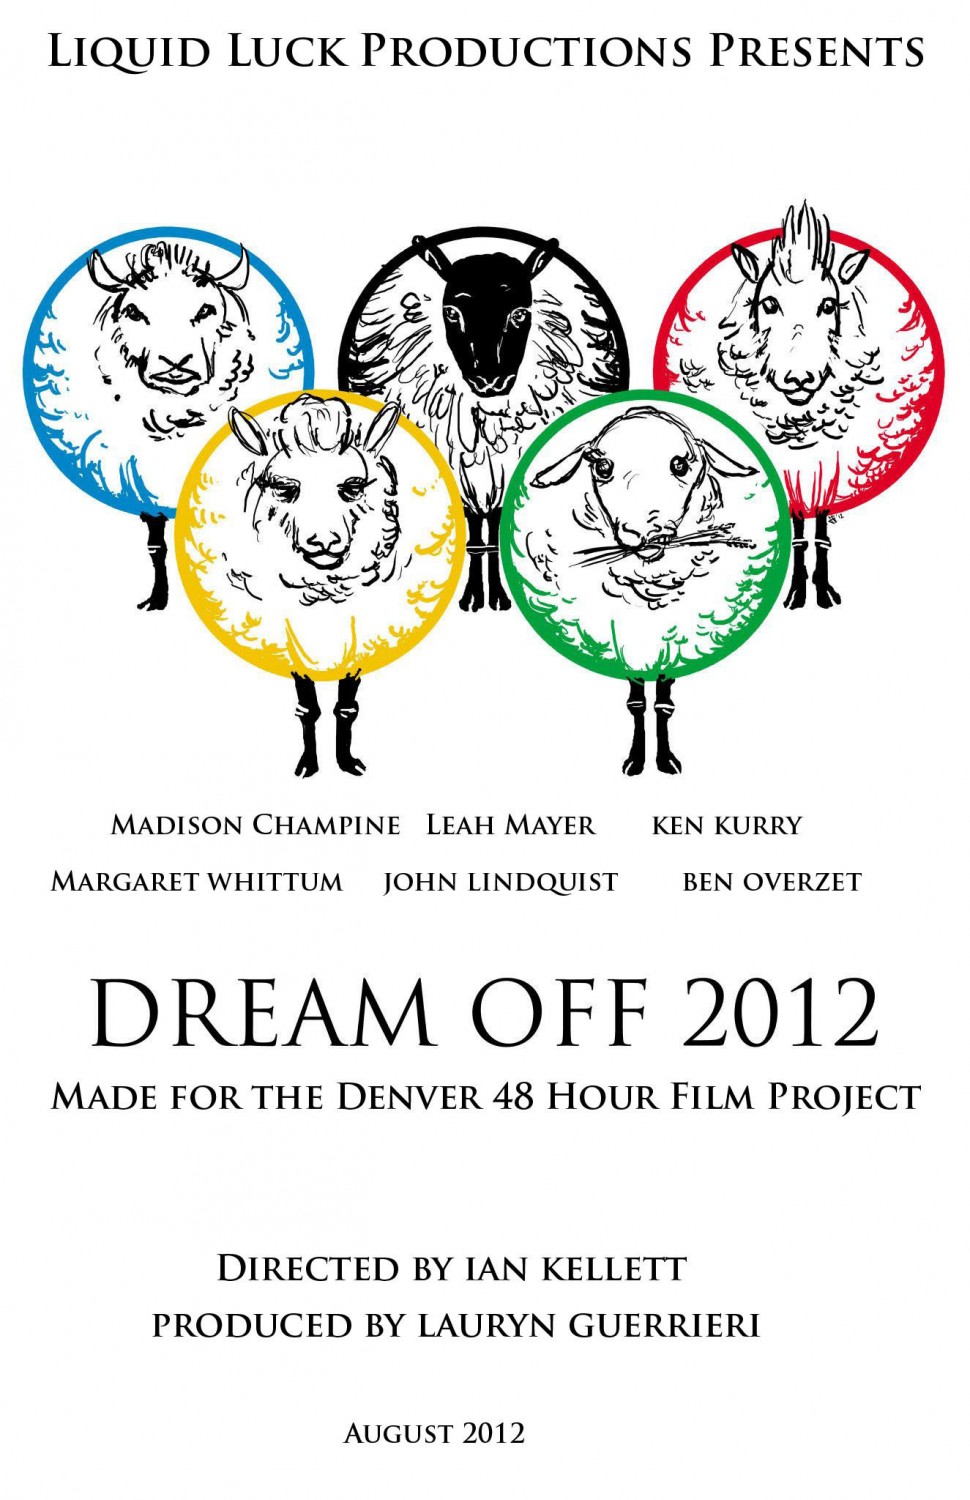 Extra Large Movie Poster Image for Dreamoff 2012